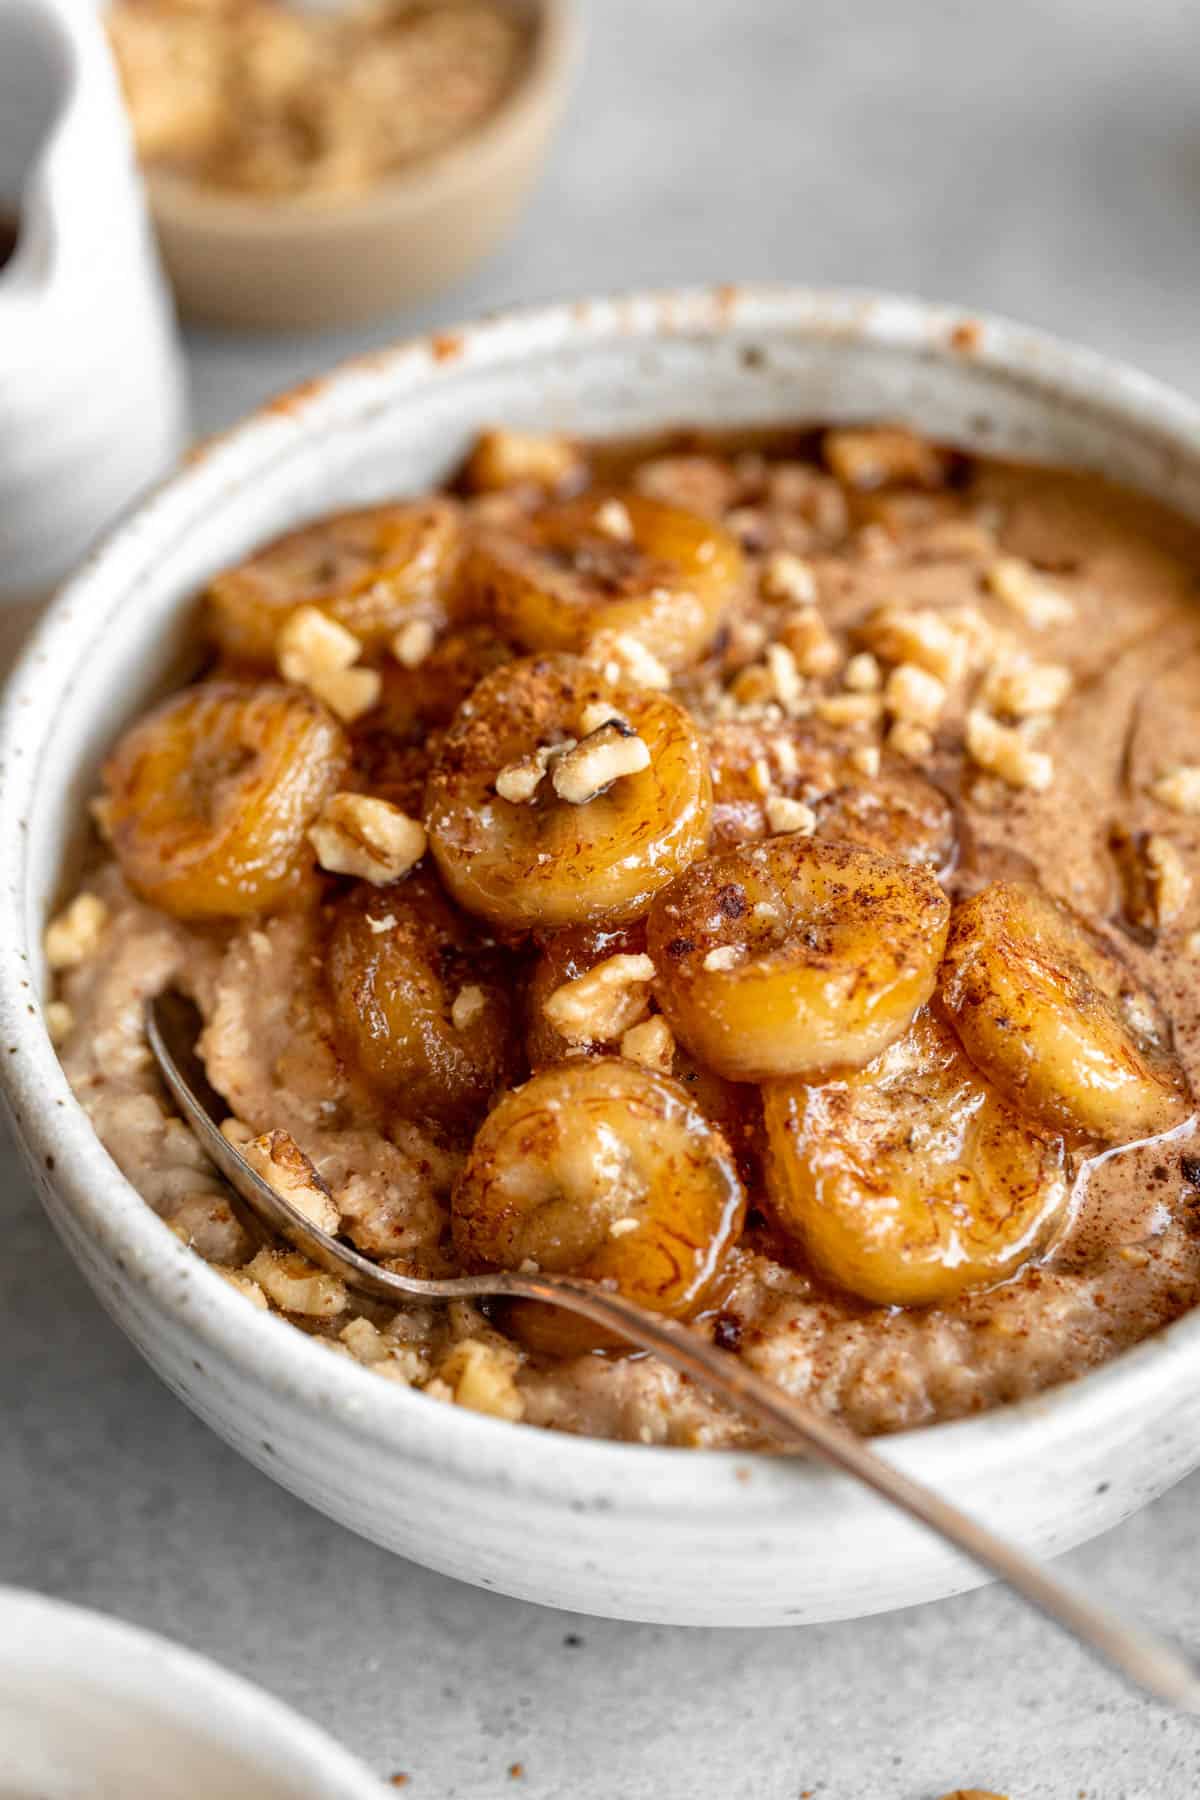 angled view of the oatmeal with caramelized banana on top 